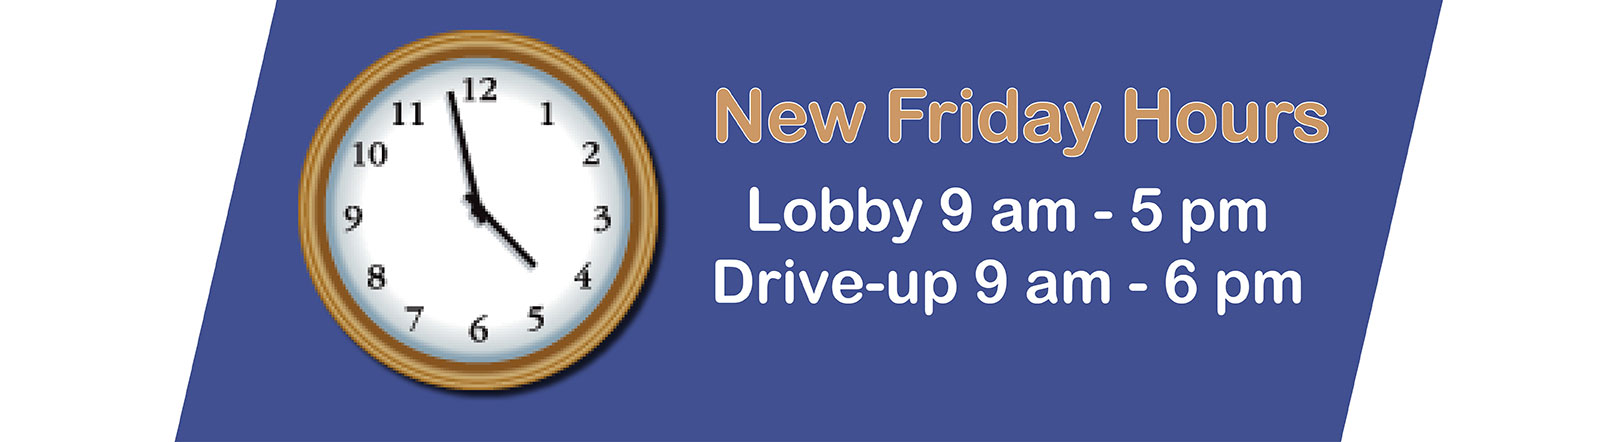 New Friday Hours Lobby 9 to 5, drive up 9 to 6